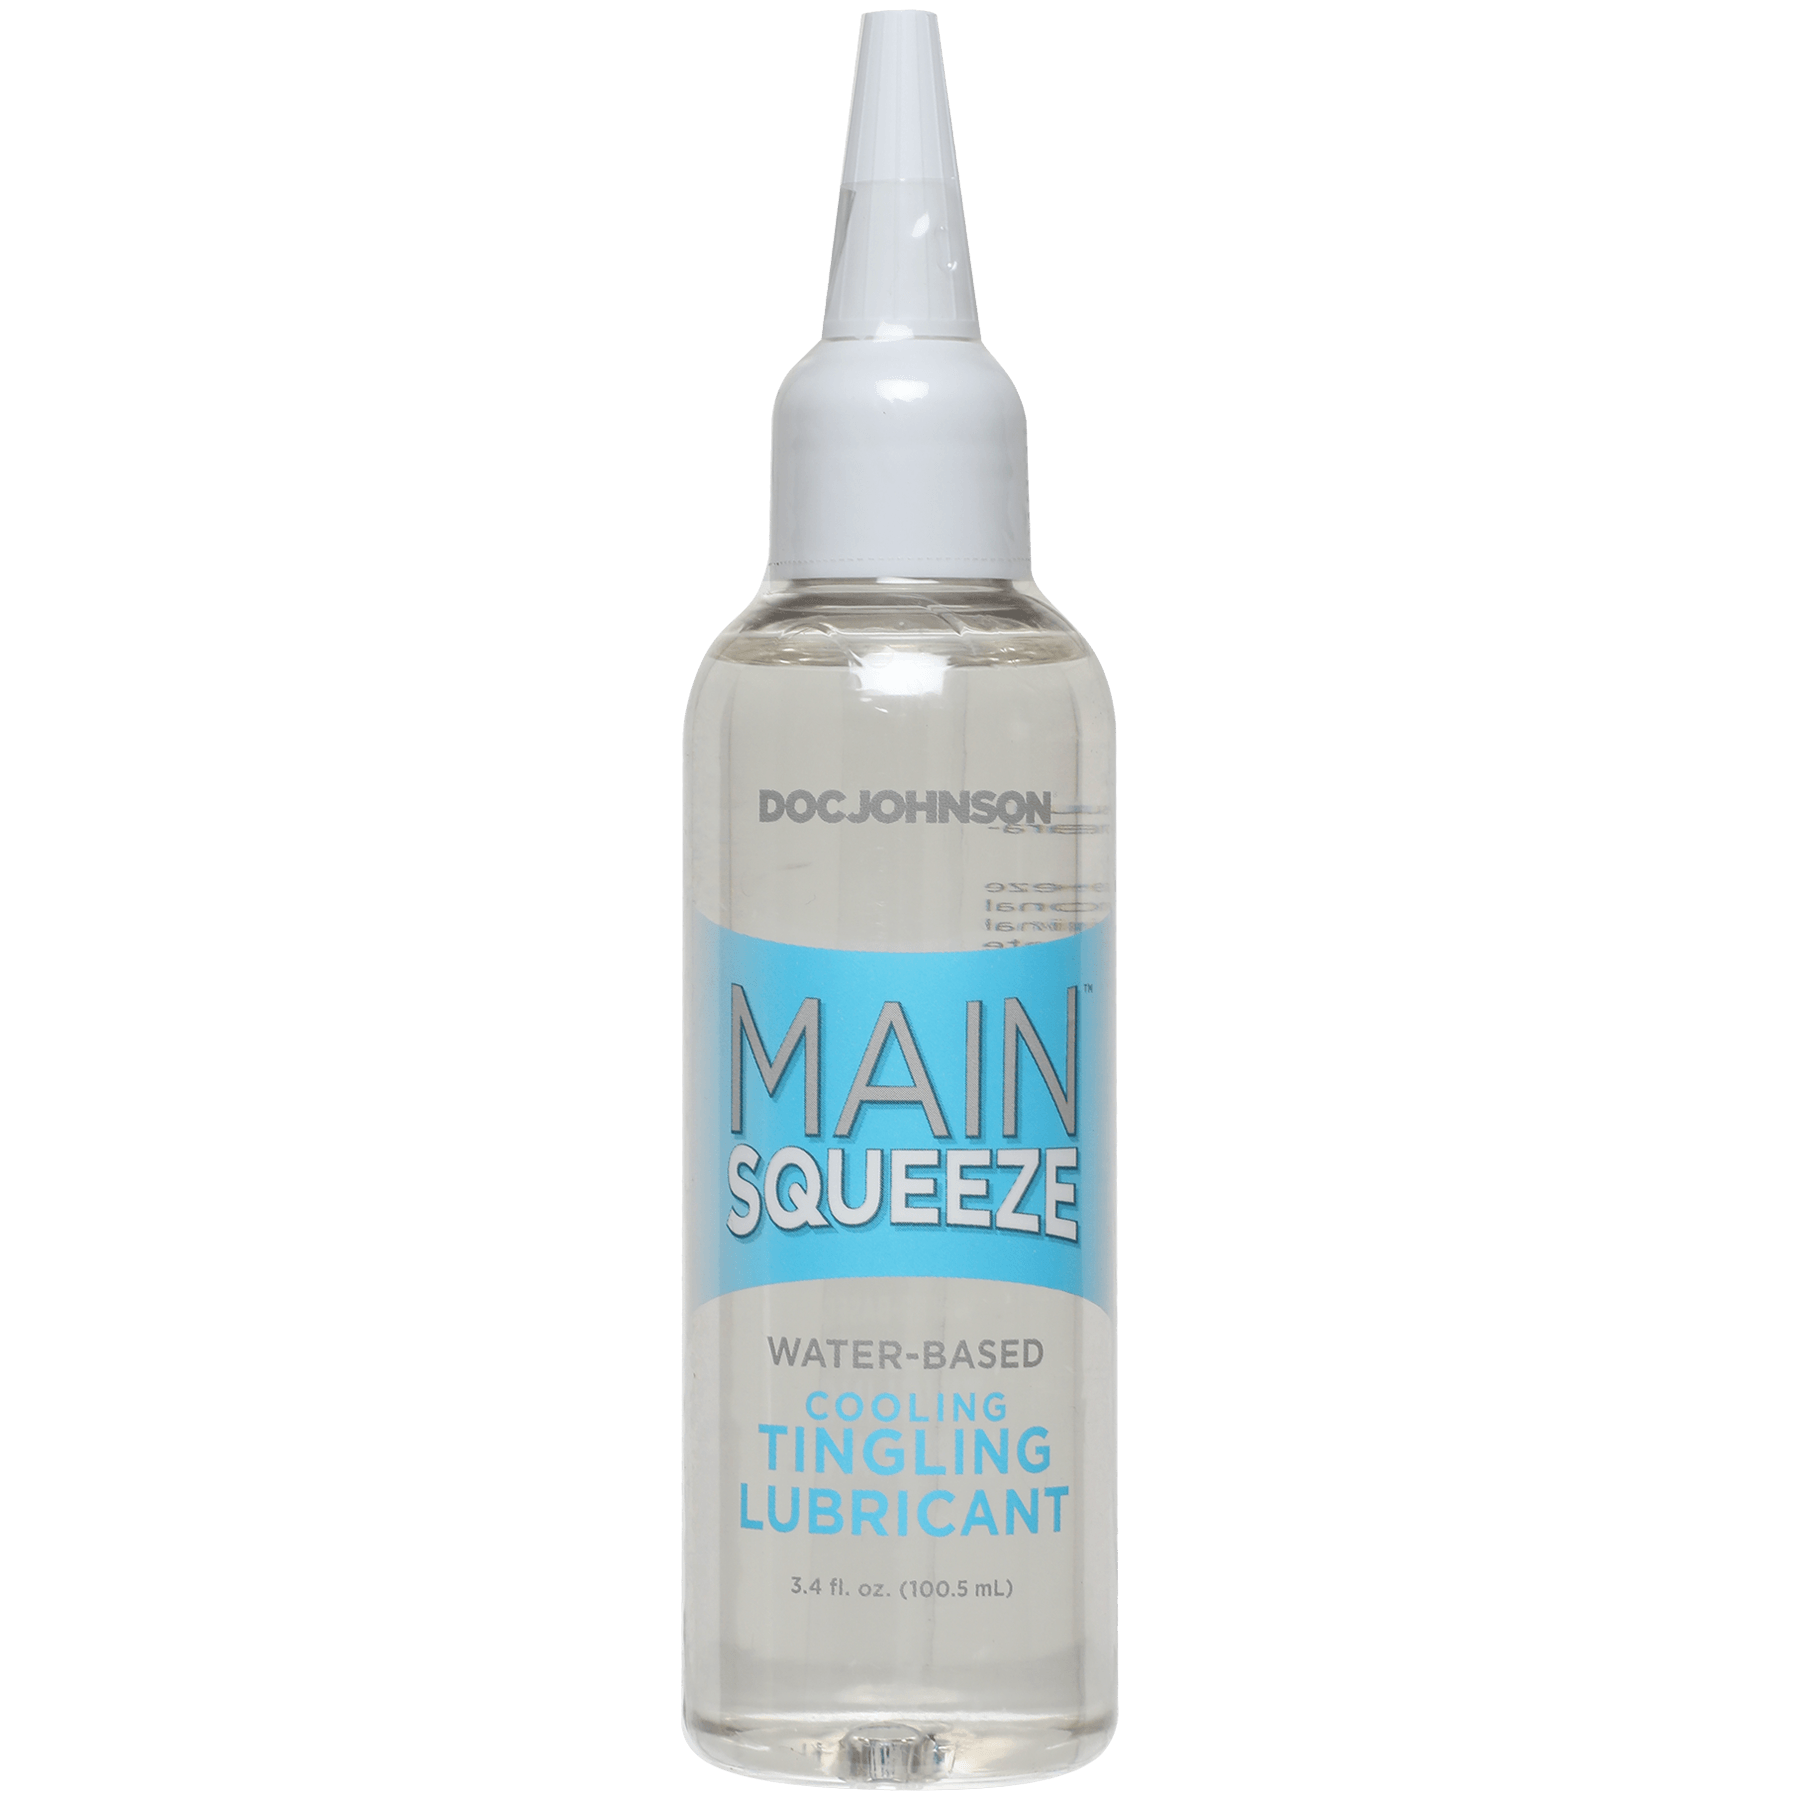 Doc Johnson Main Squeeze Cooling Lube - Buy At Luxury Toy X - Free 3-Day Shipping